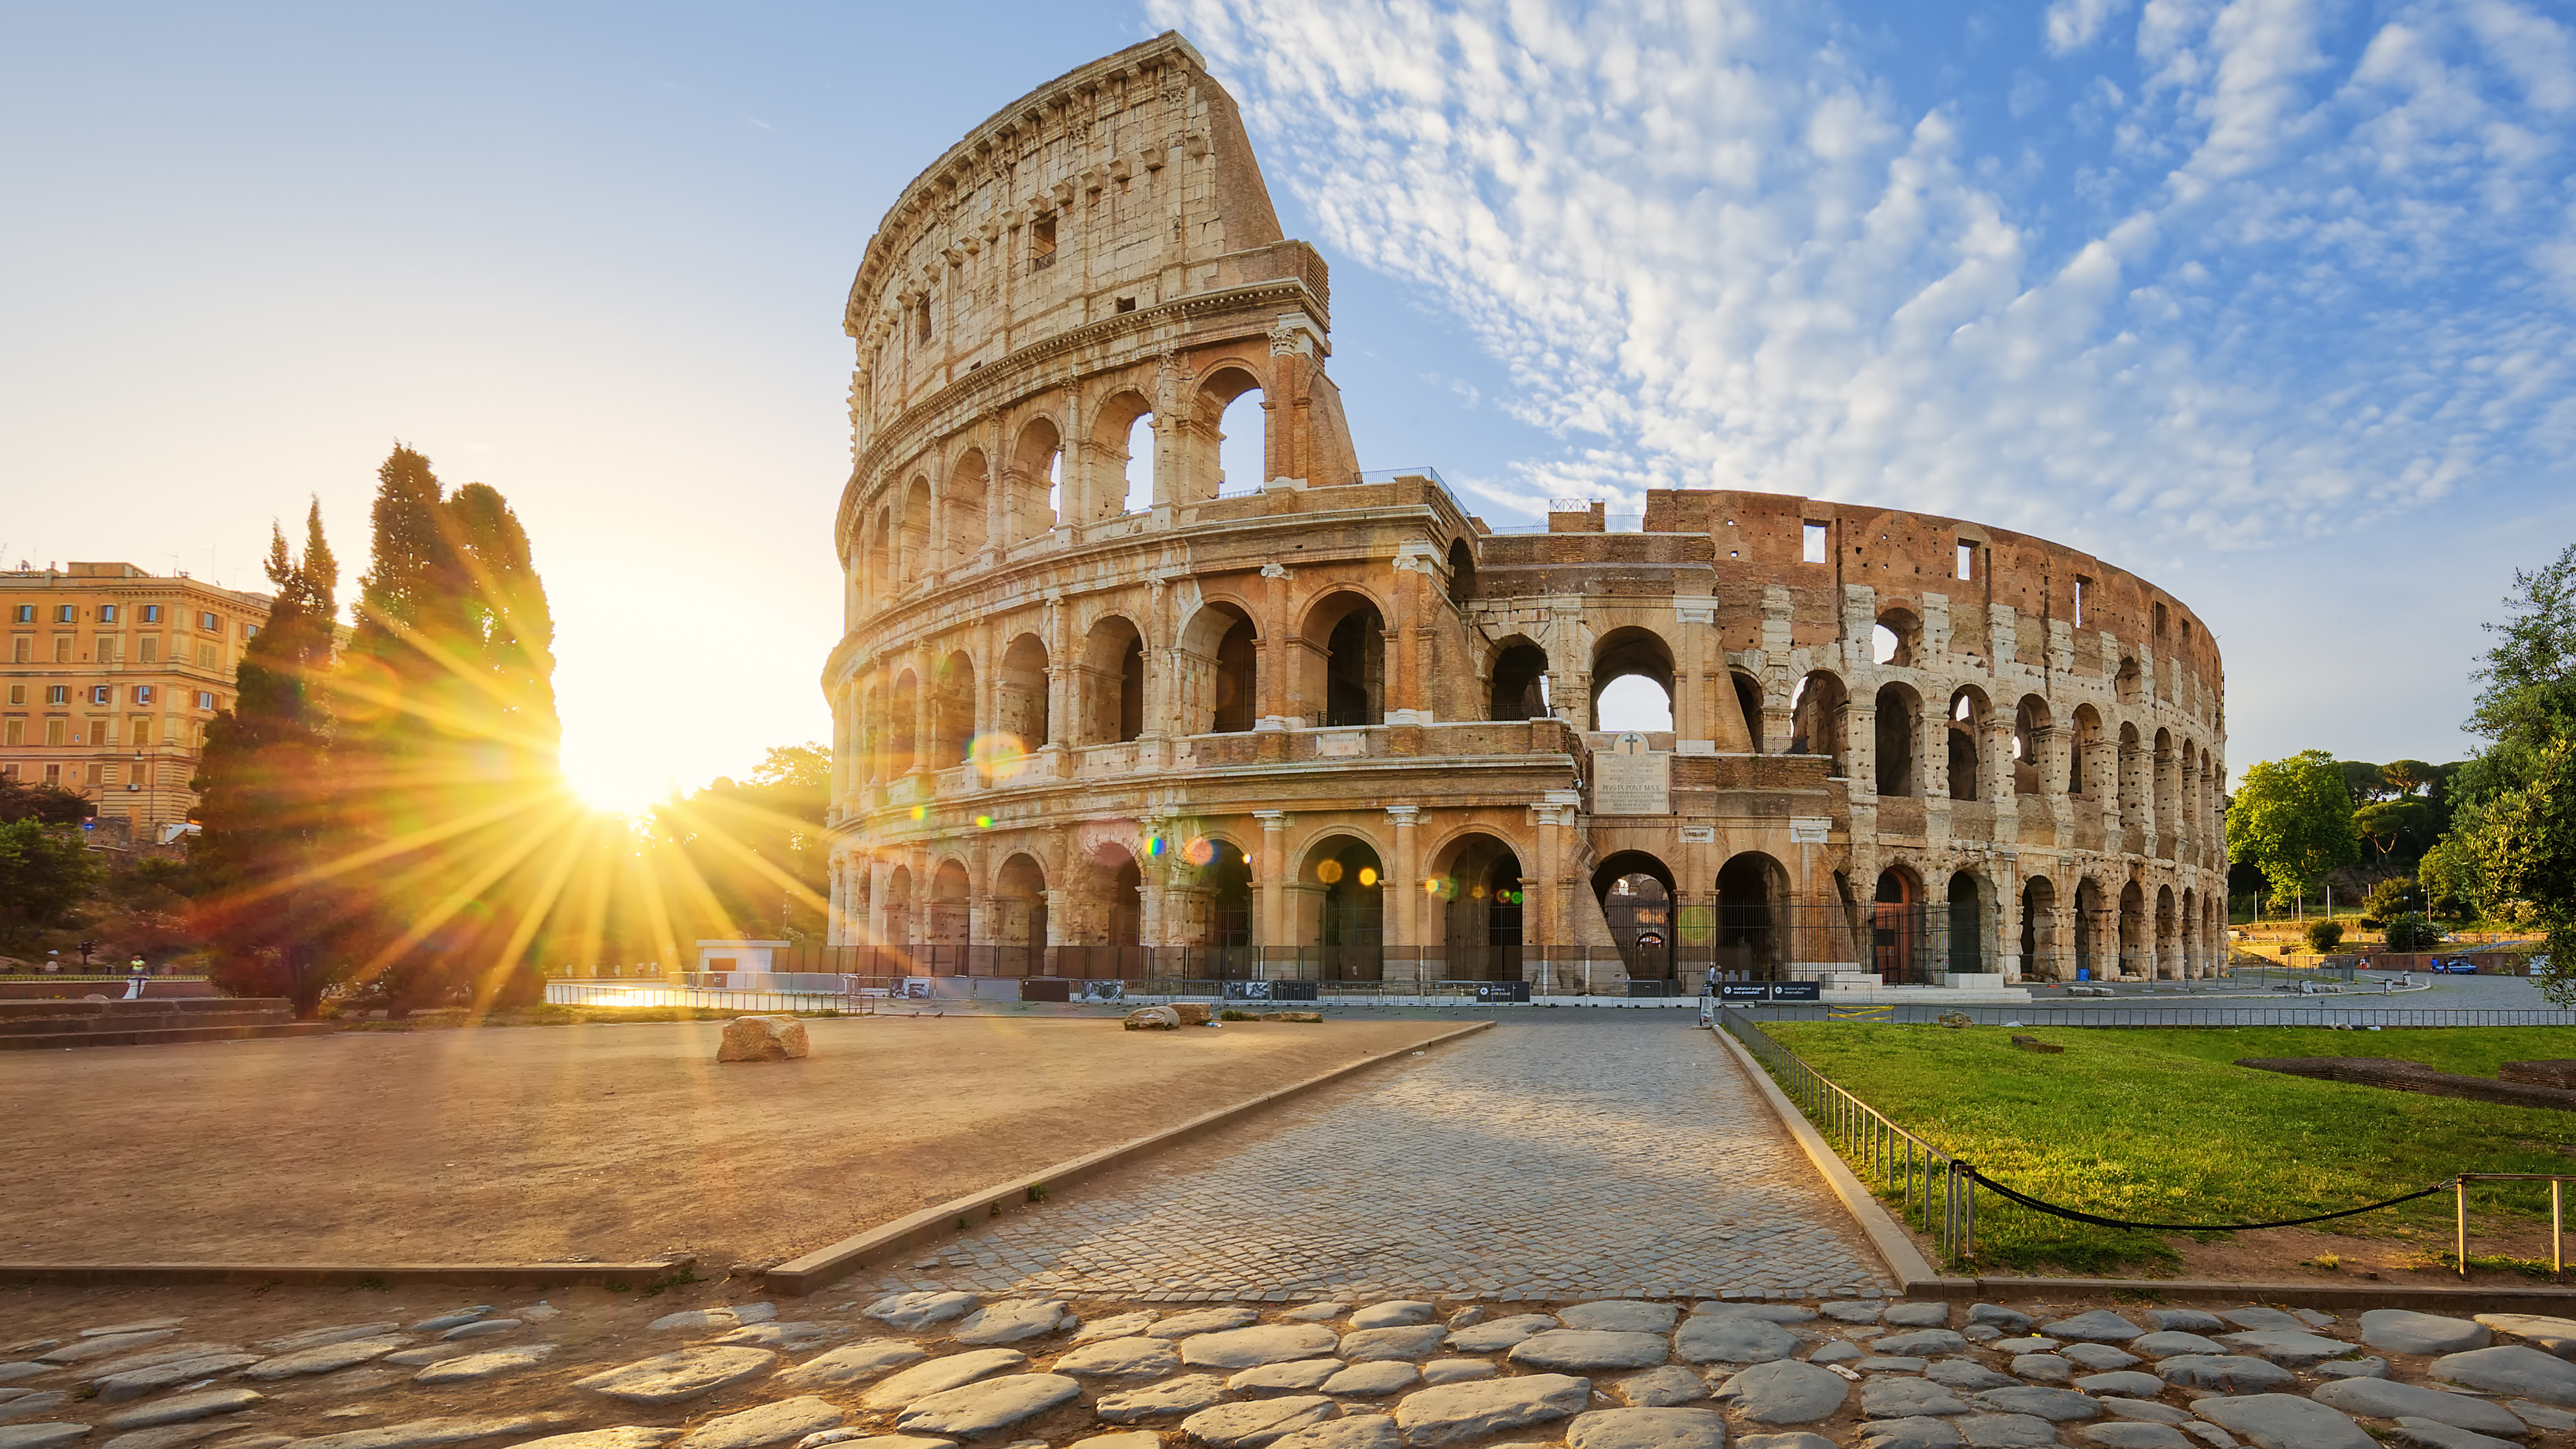 Best things to do in Rome 2022 | Attractions & activities